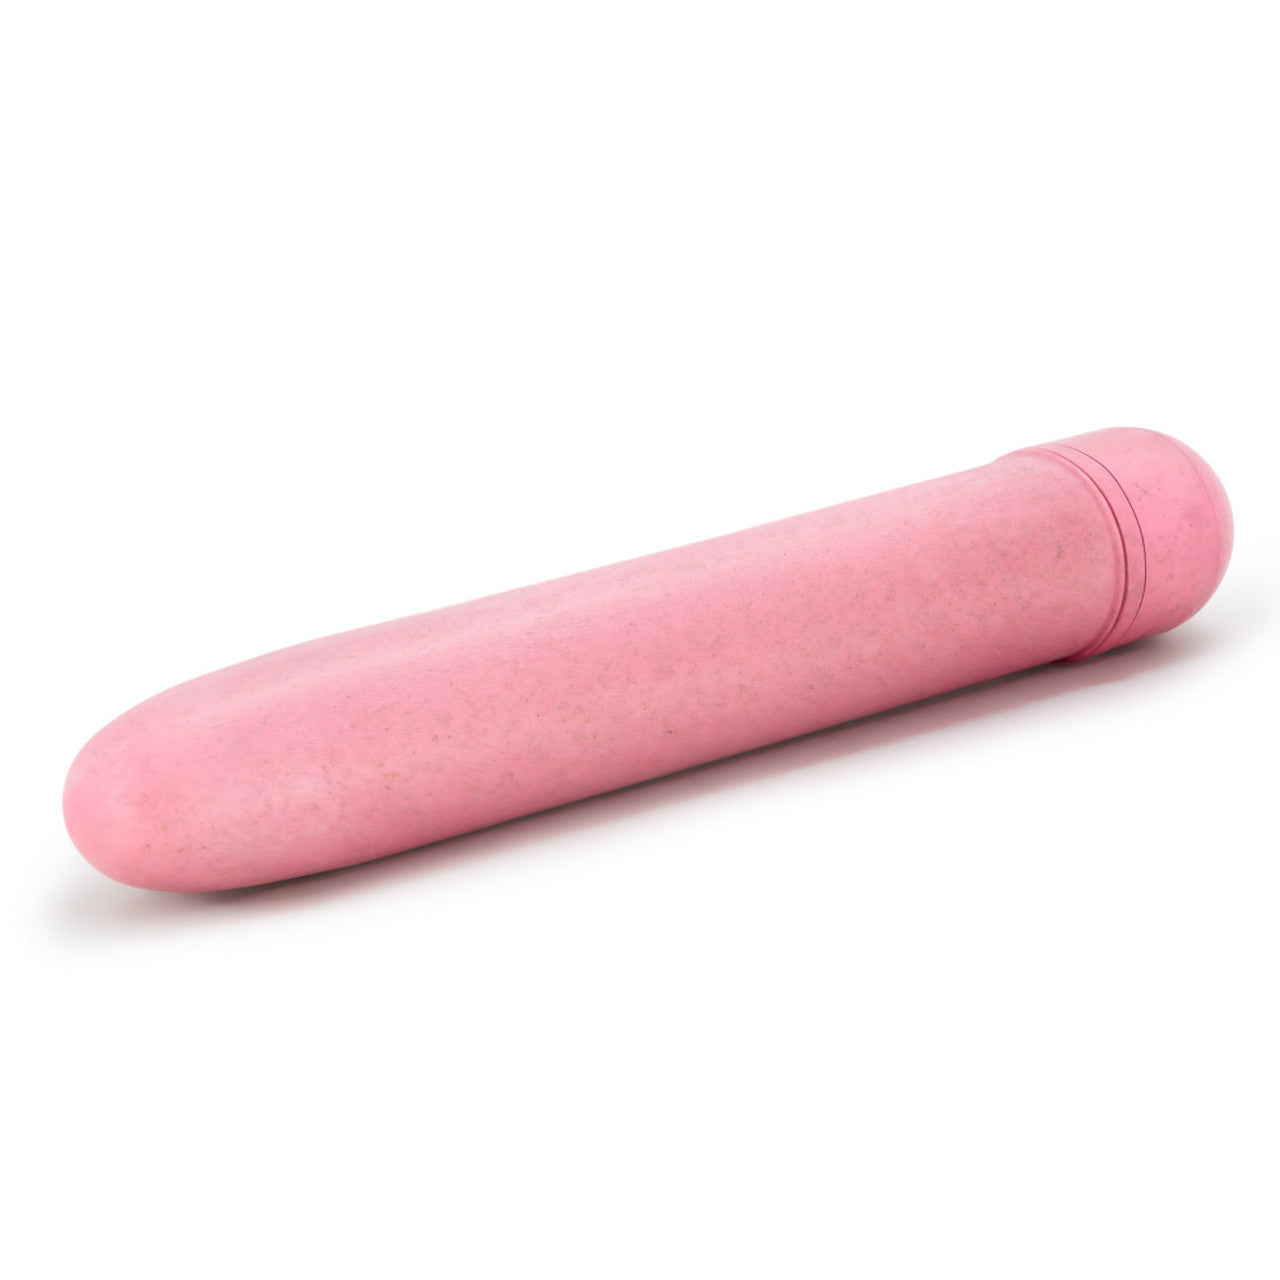 Gaia Eco Biadegradable Vibrator - Coral - Thorn & Feather Sex Toy Canada